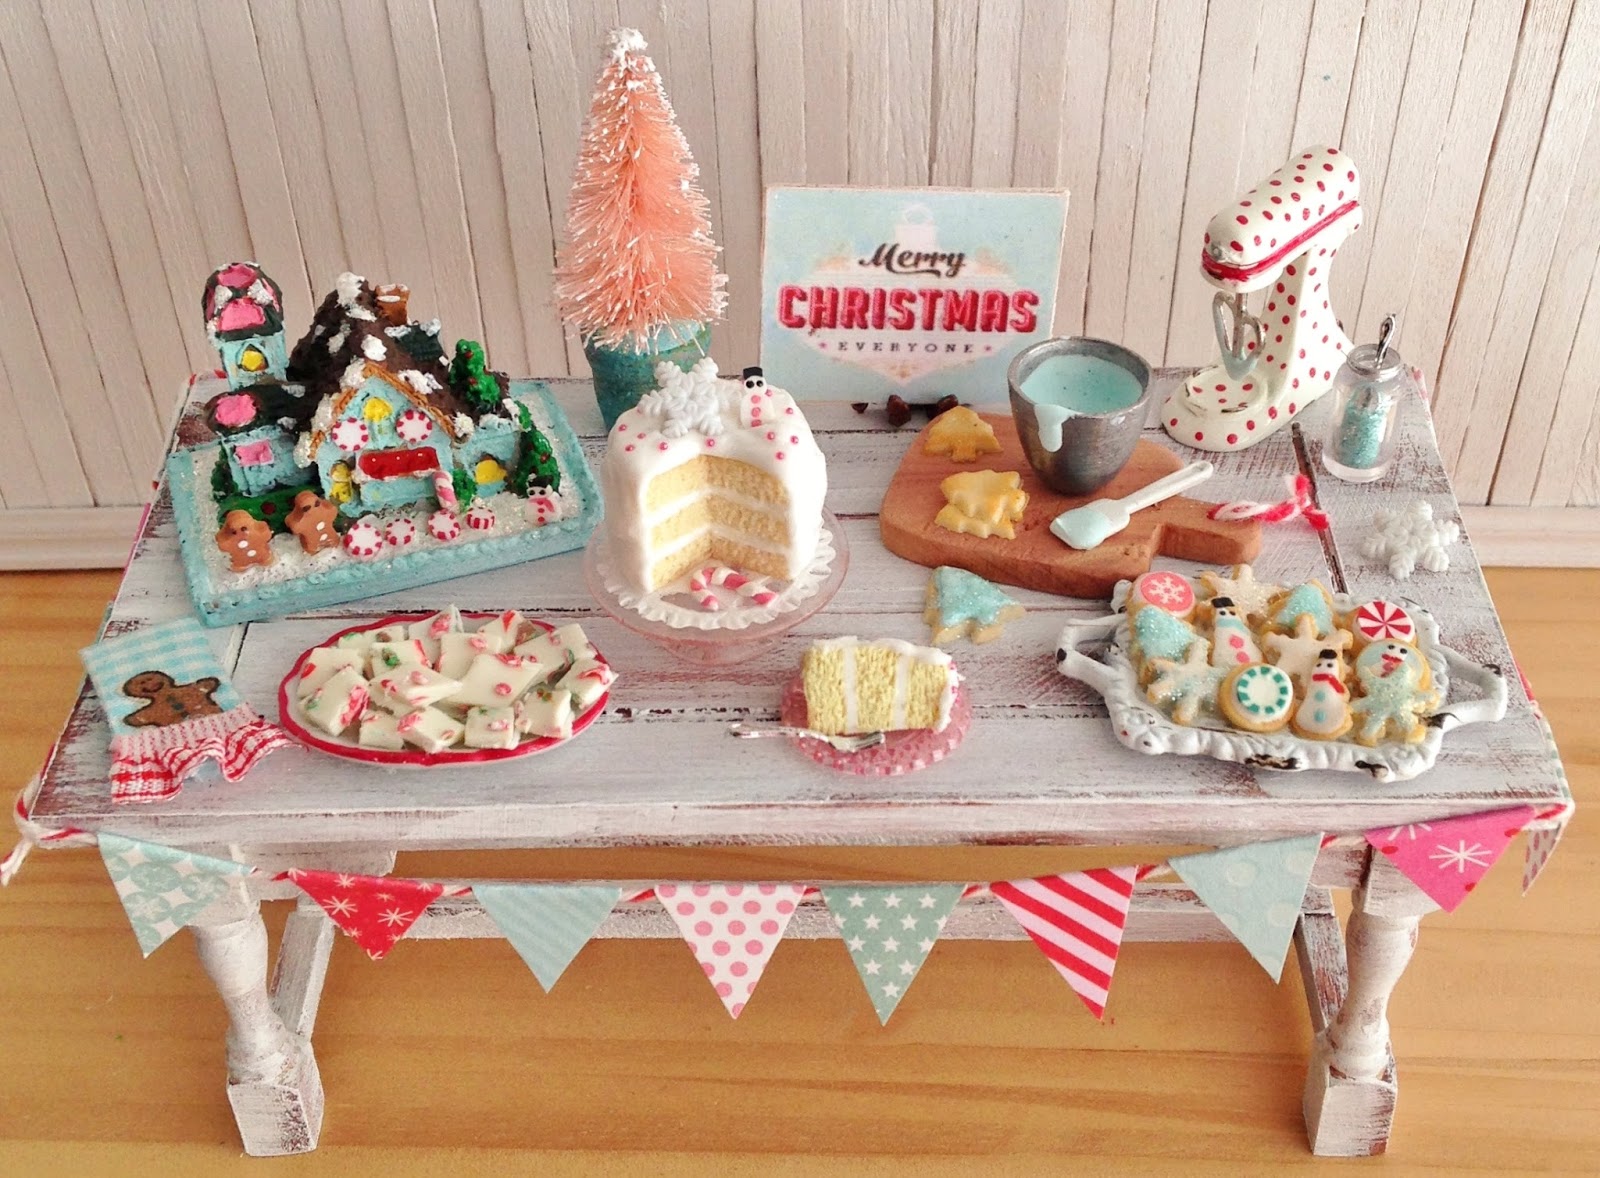 Little Things By Anna: Christmas Baking Table